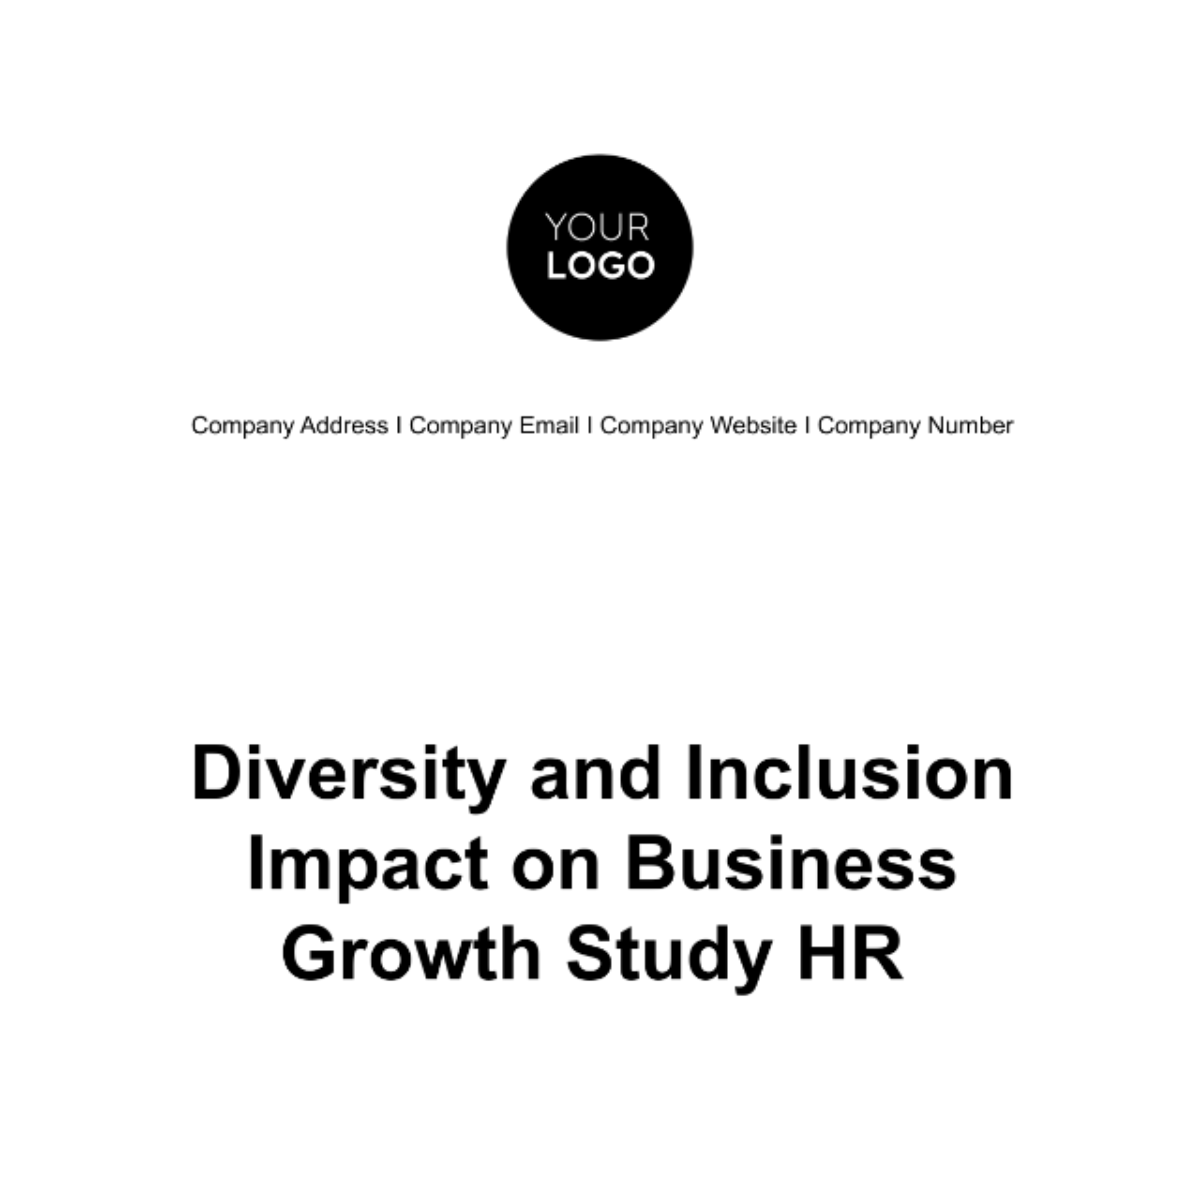 Free Diversity and Inclusion Impact on Business Growth Study HR Template